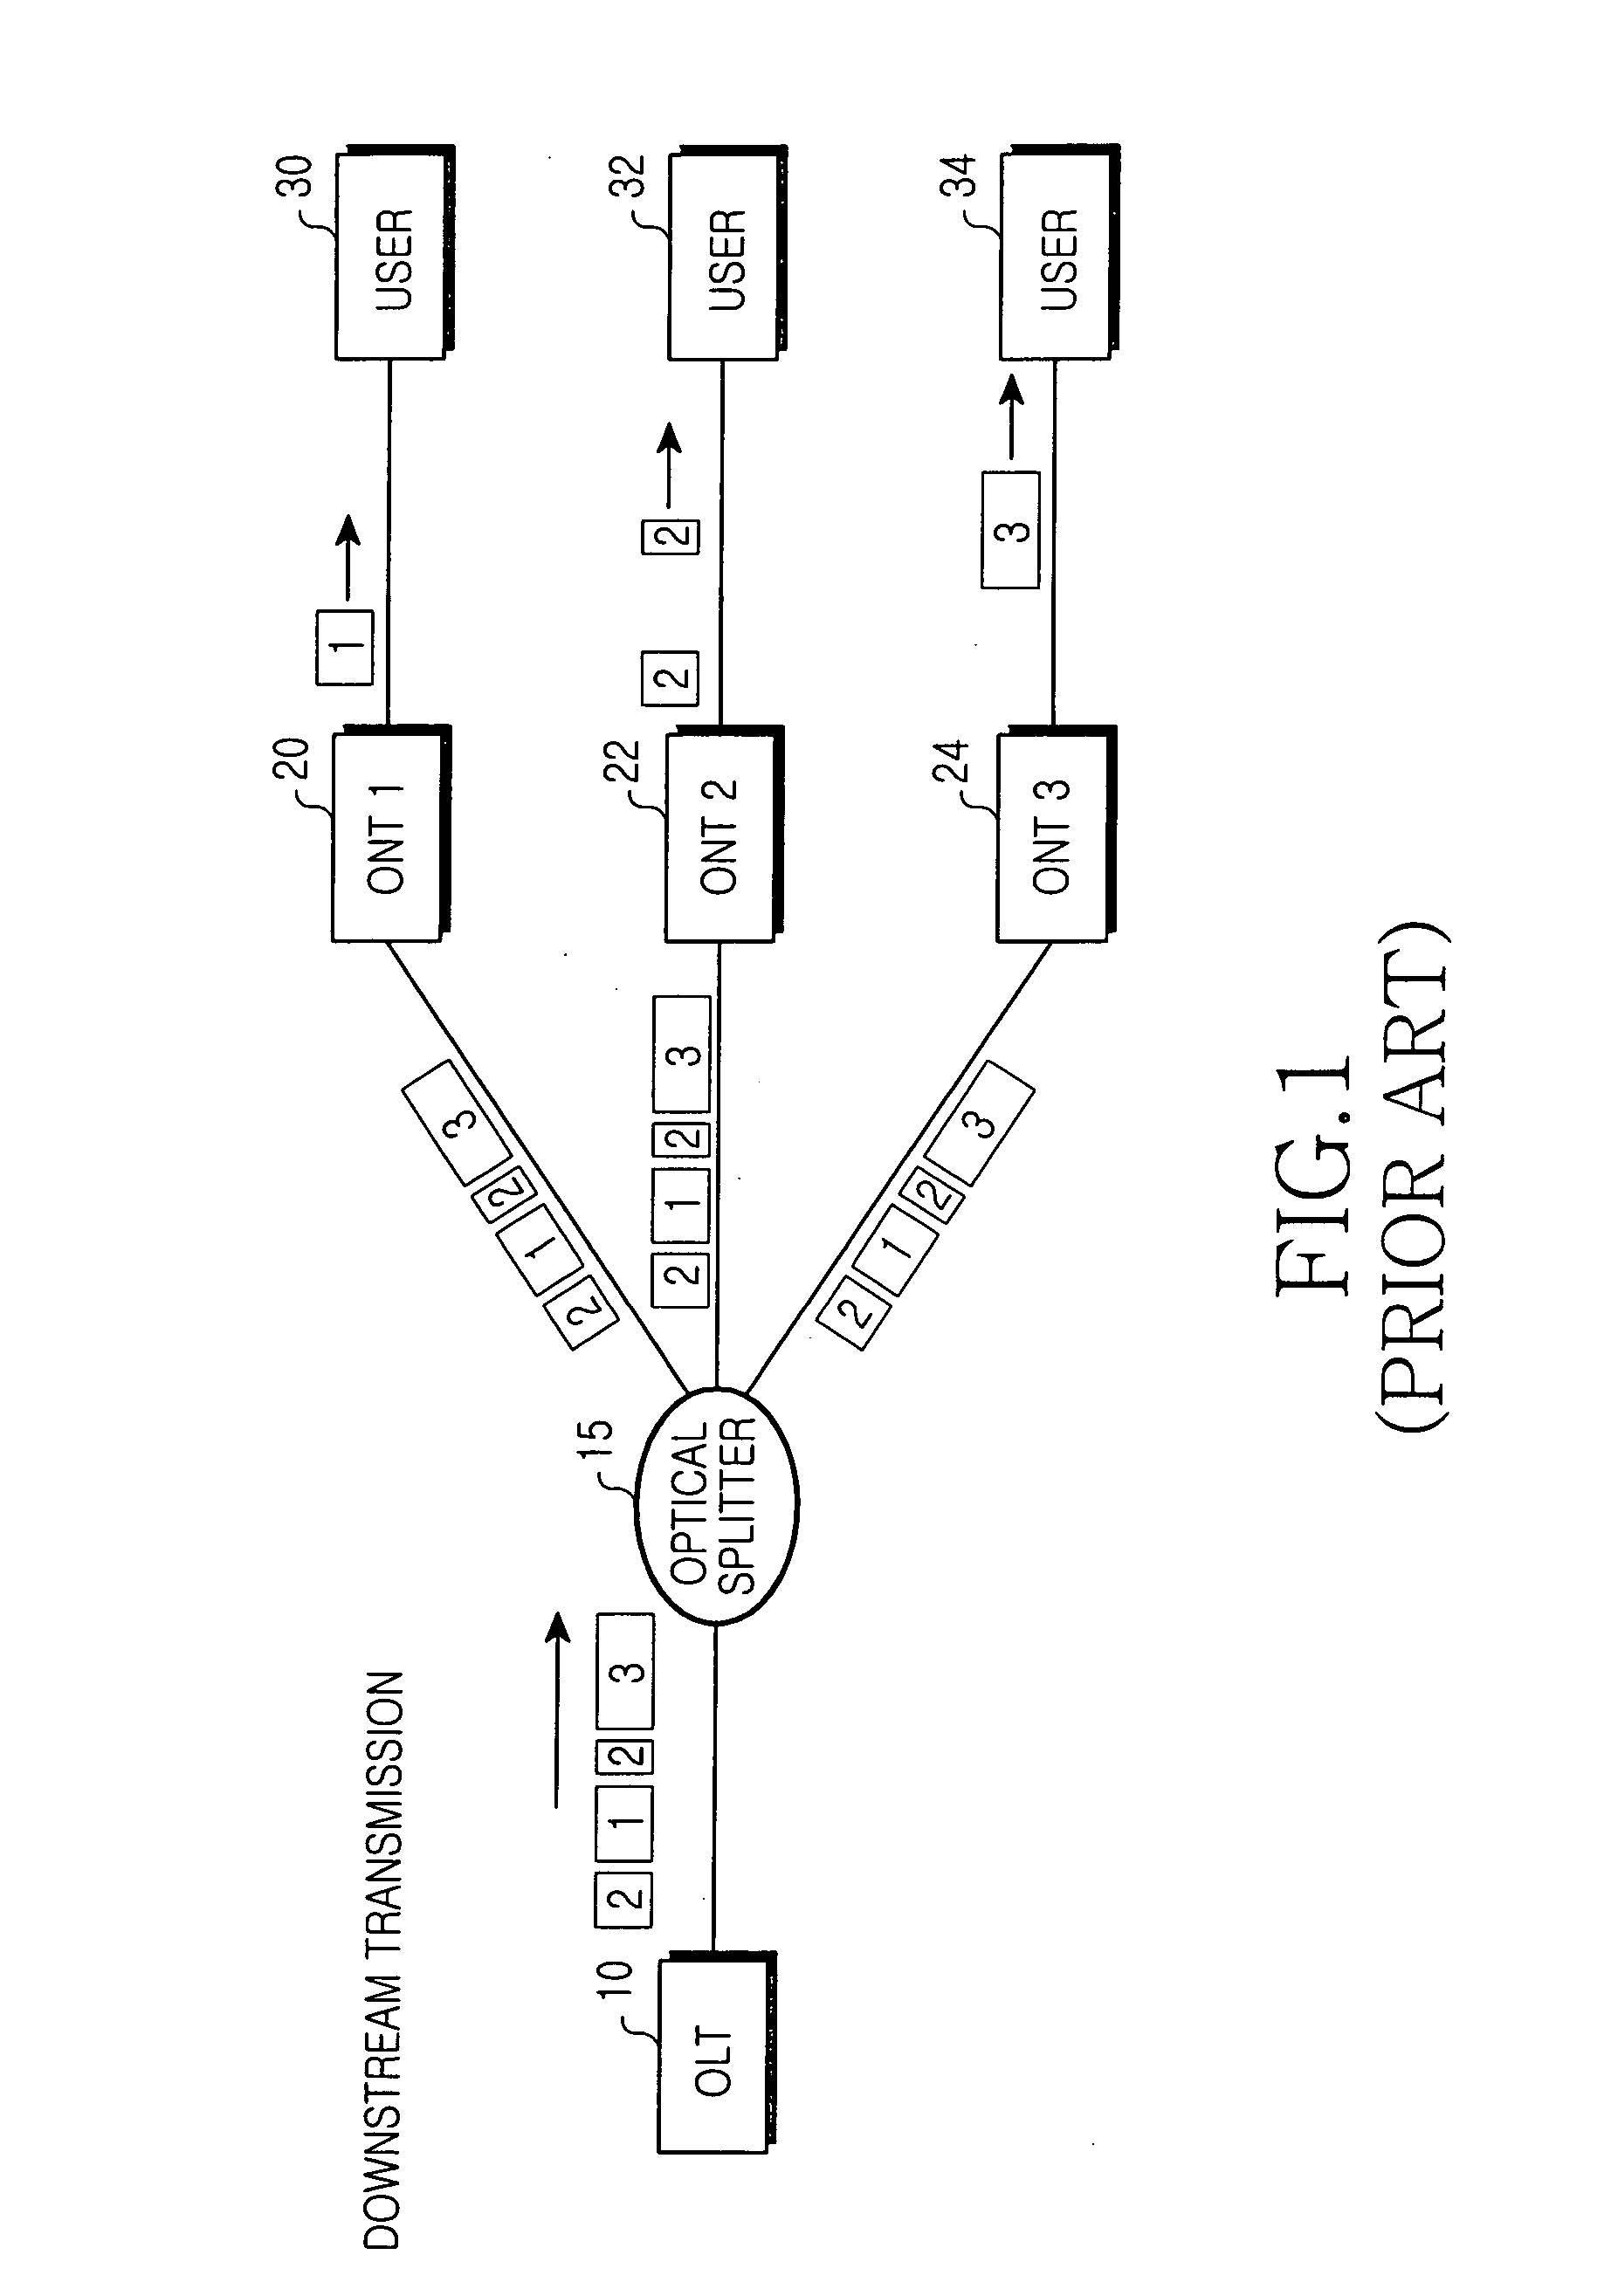 Gigabit ethernet passive optical network and method for accurately detecting data errors